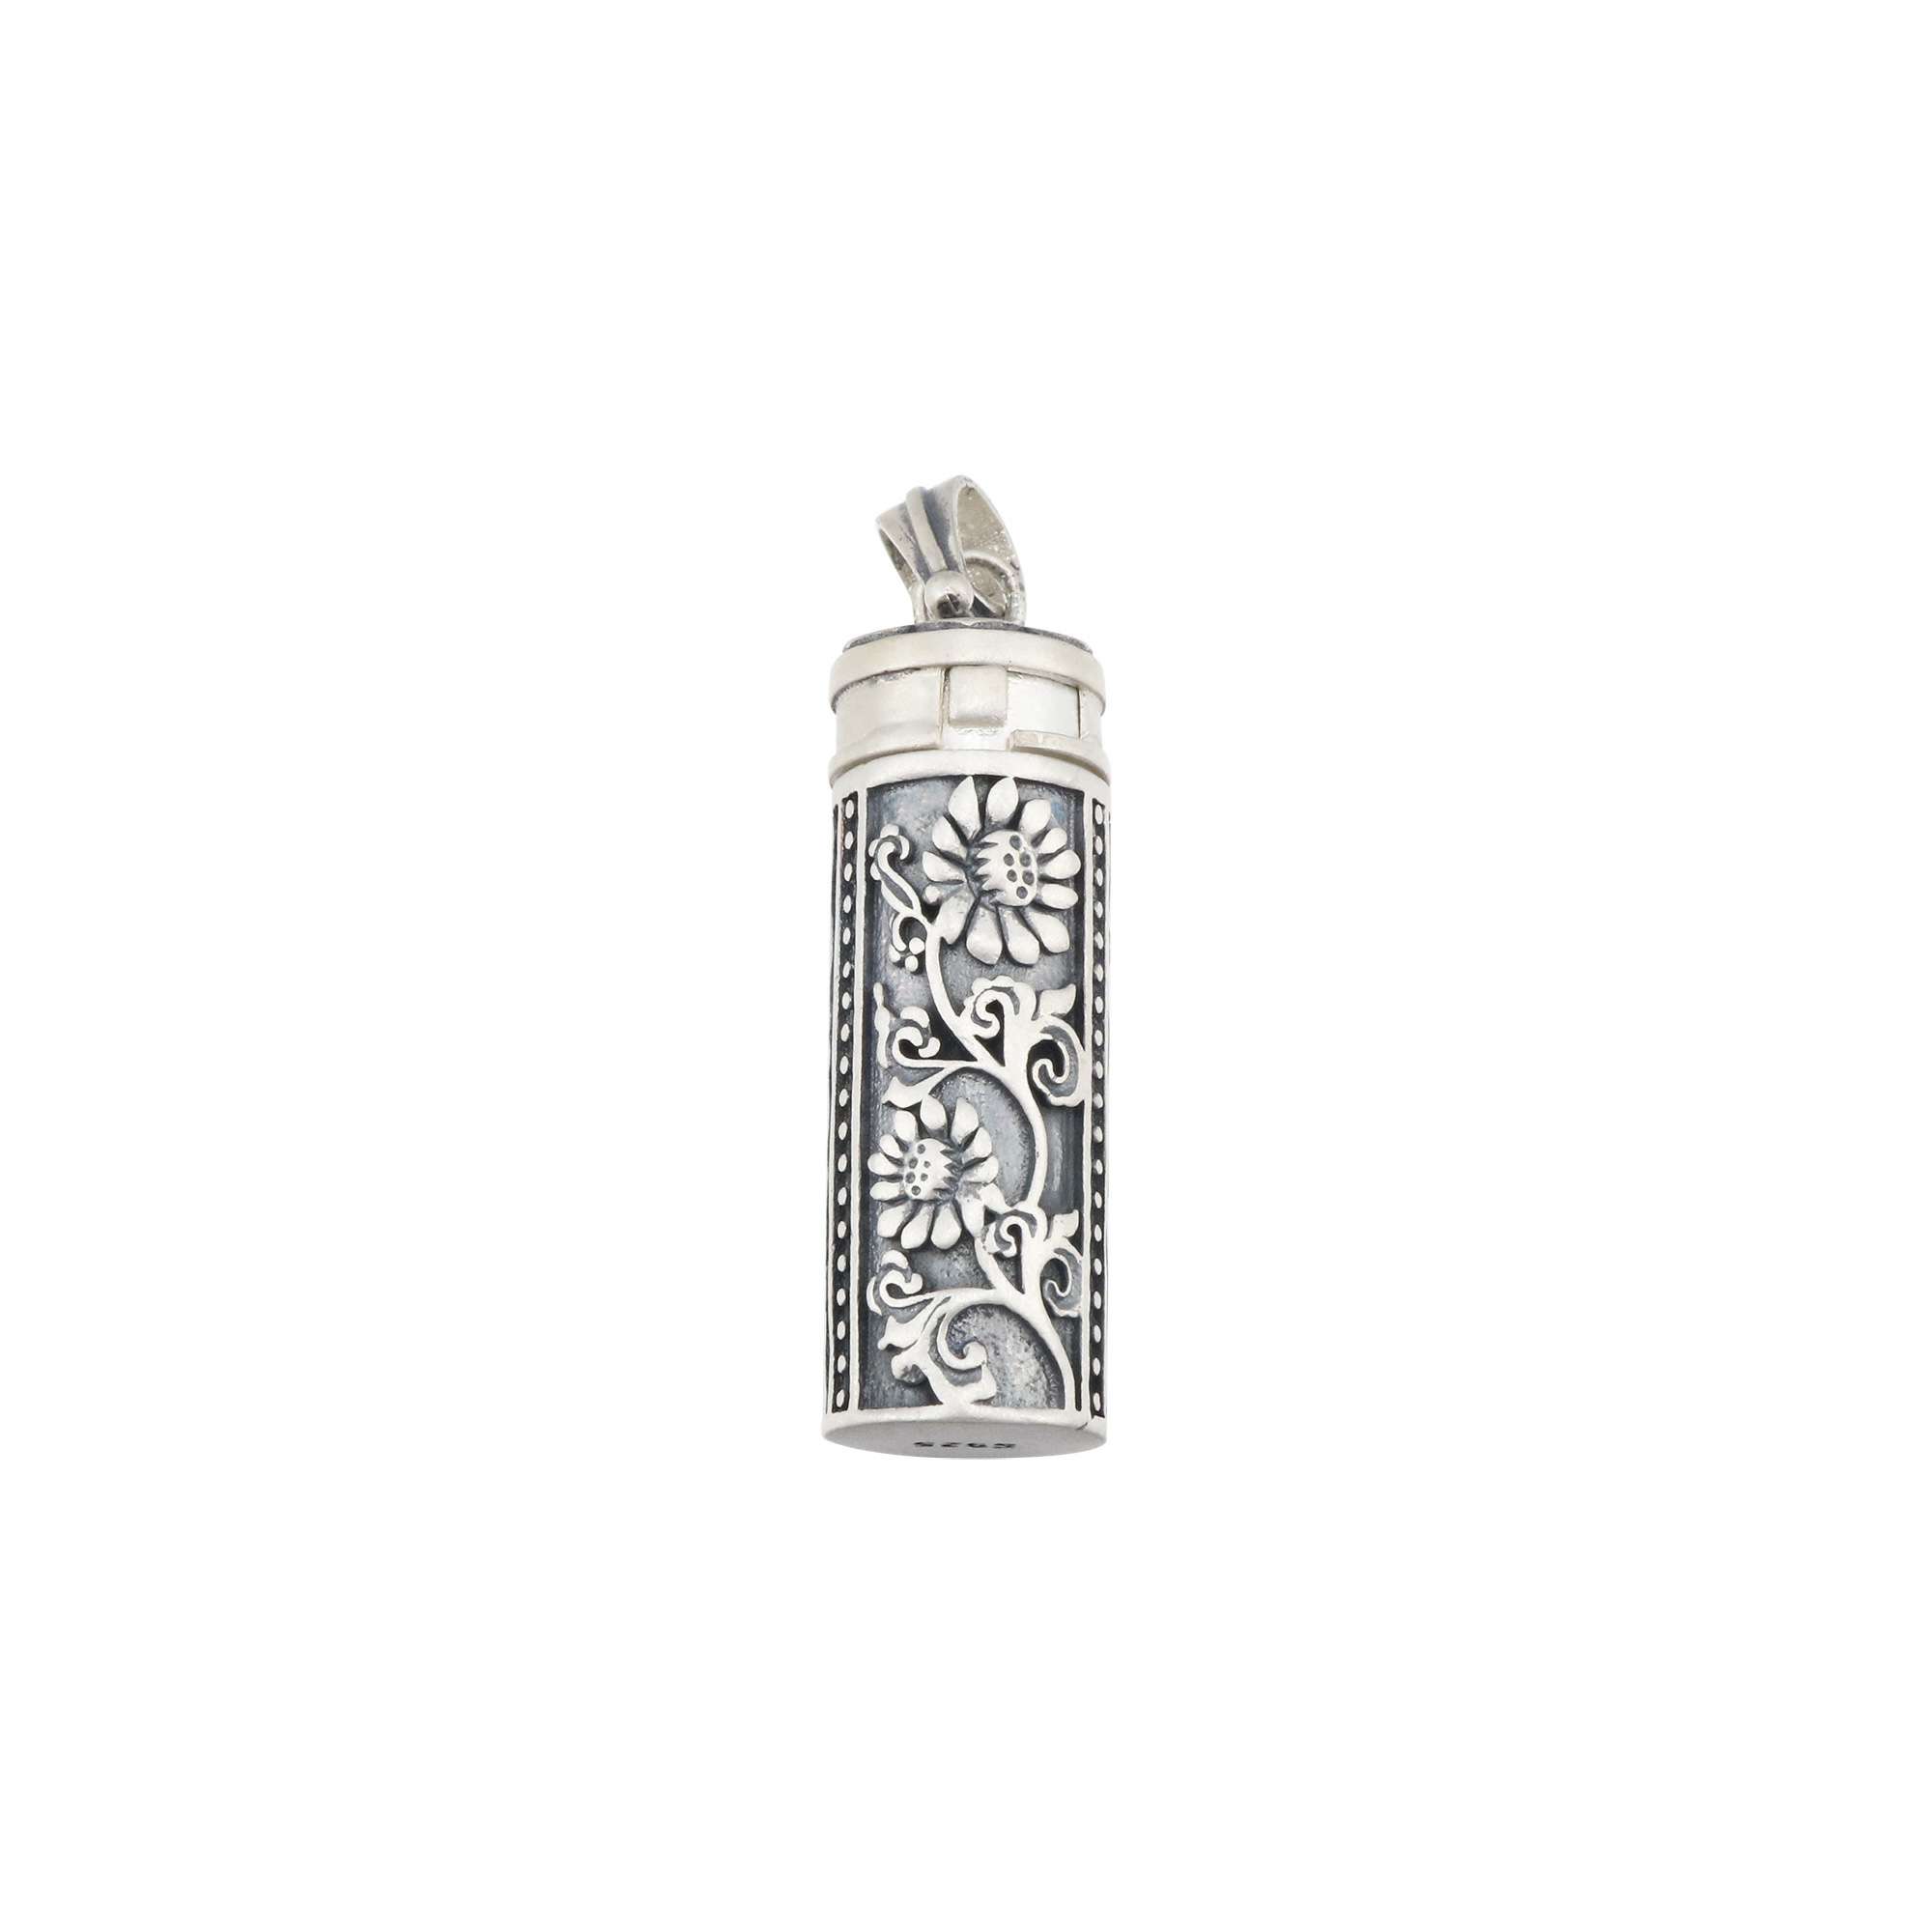 Tube Keepsake Ash Canister Cremation Urn Solid 925 Sterling Silver Wish Vial Pendant Prayer Box Antiqued Silver 10x30MM 1190027 - Click Image to Close